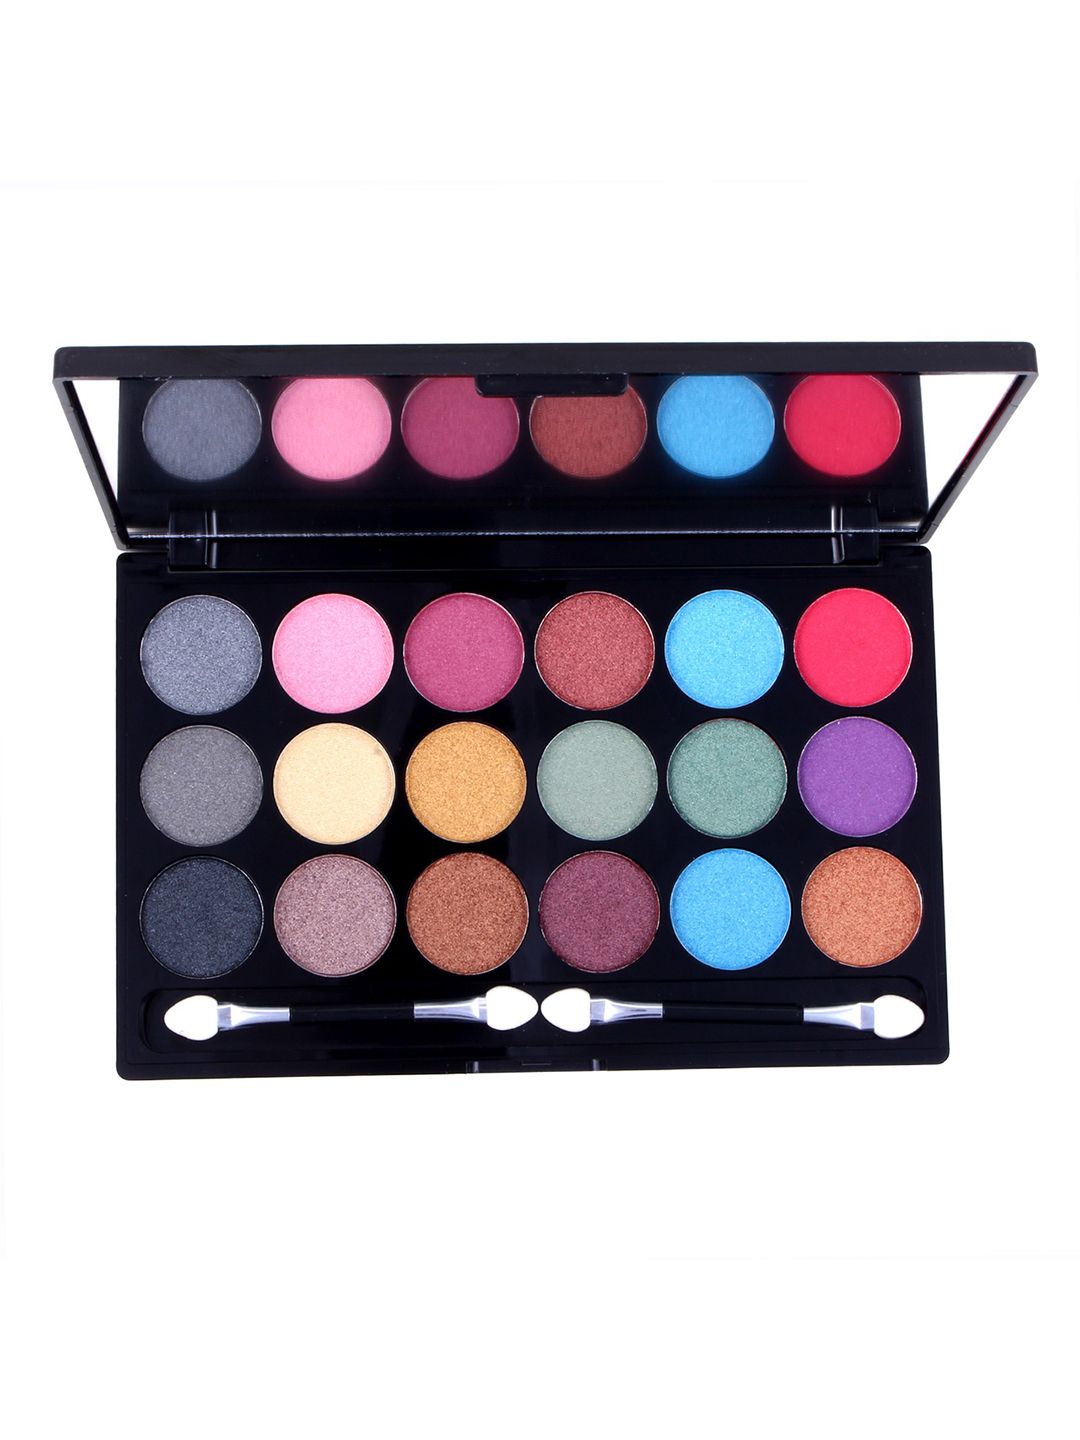 INCOLOR 18 In 1 Eyeshadow Kit 03 - 25 g Price in India